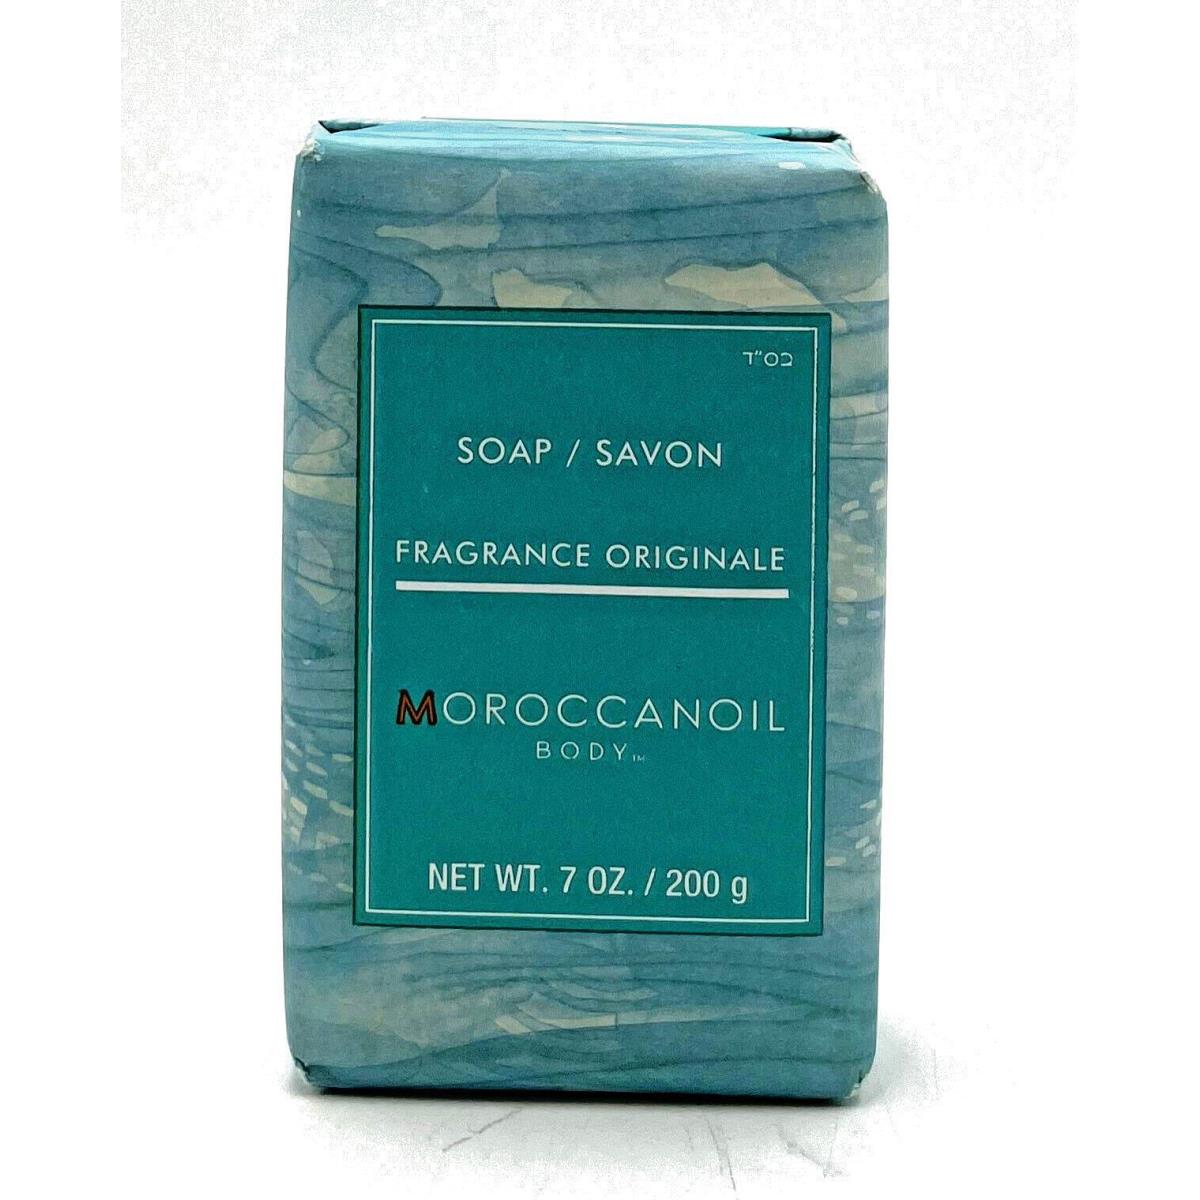 Moroccanoil Soap Cleansing Bar 7 oz-5 Pack